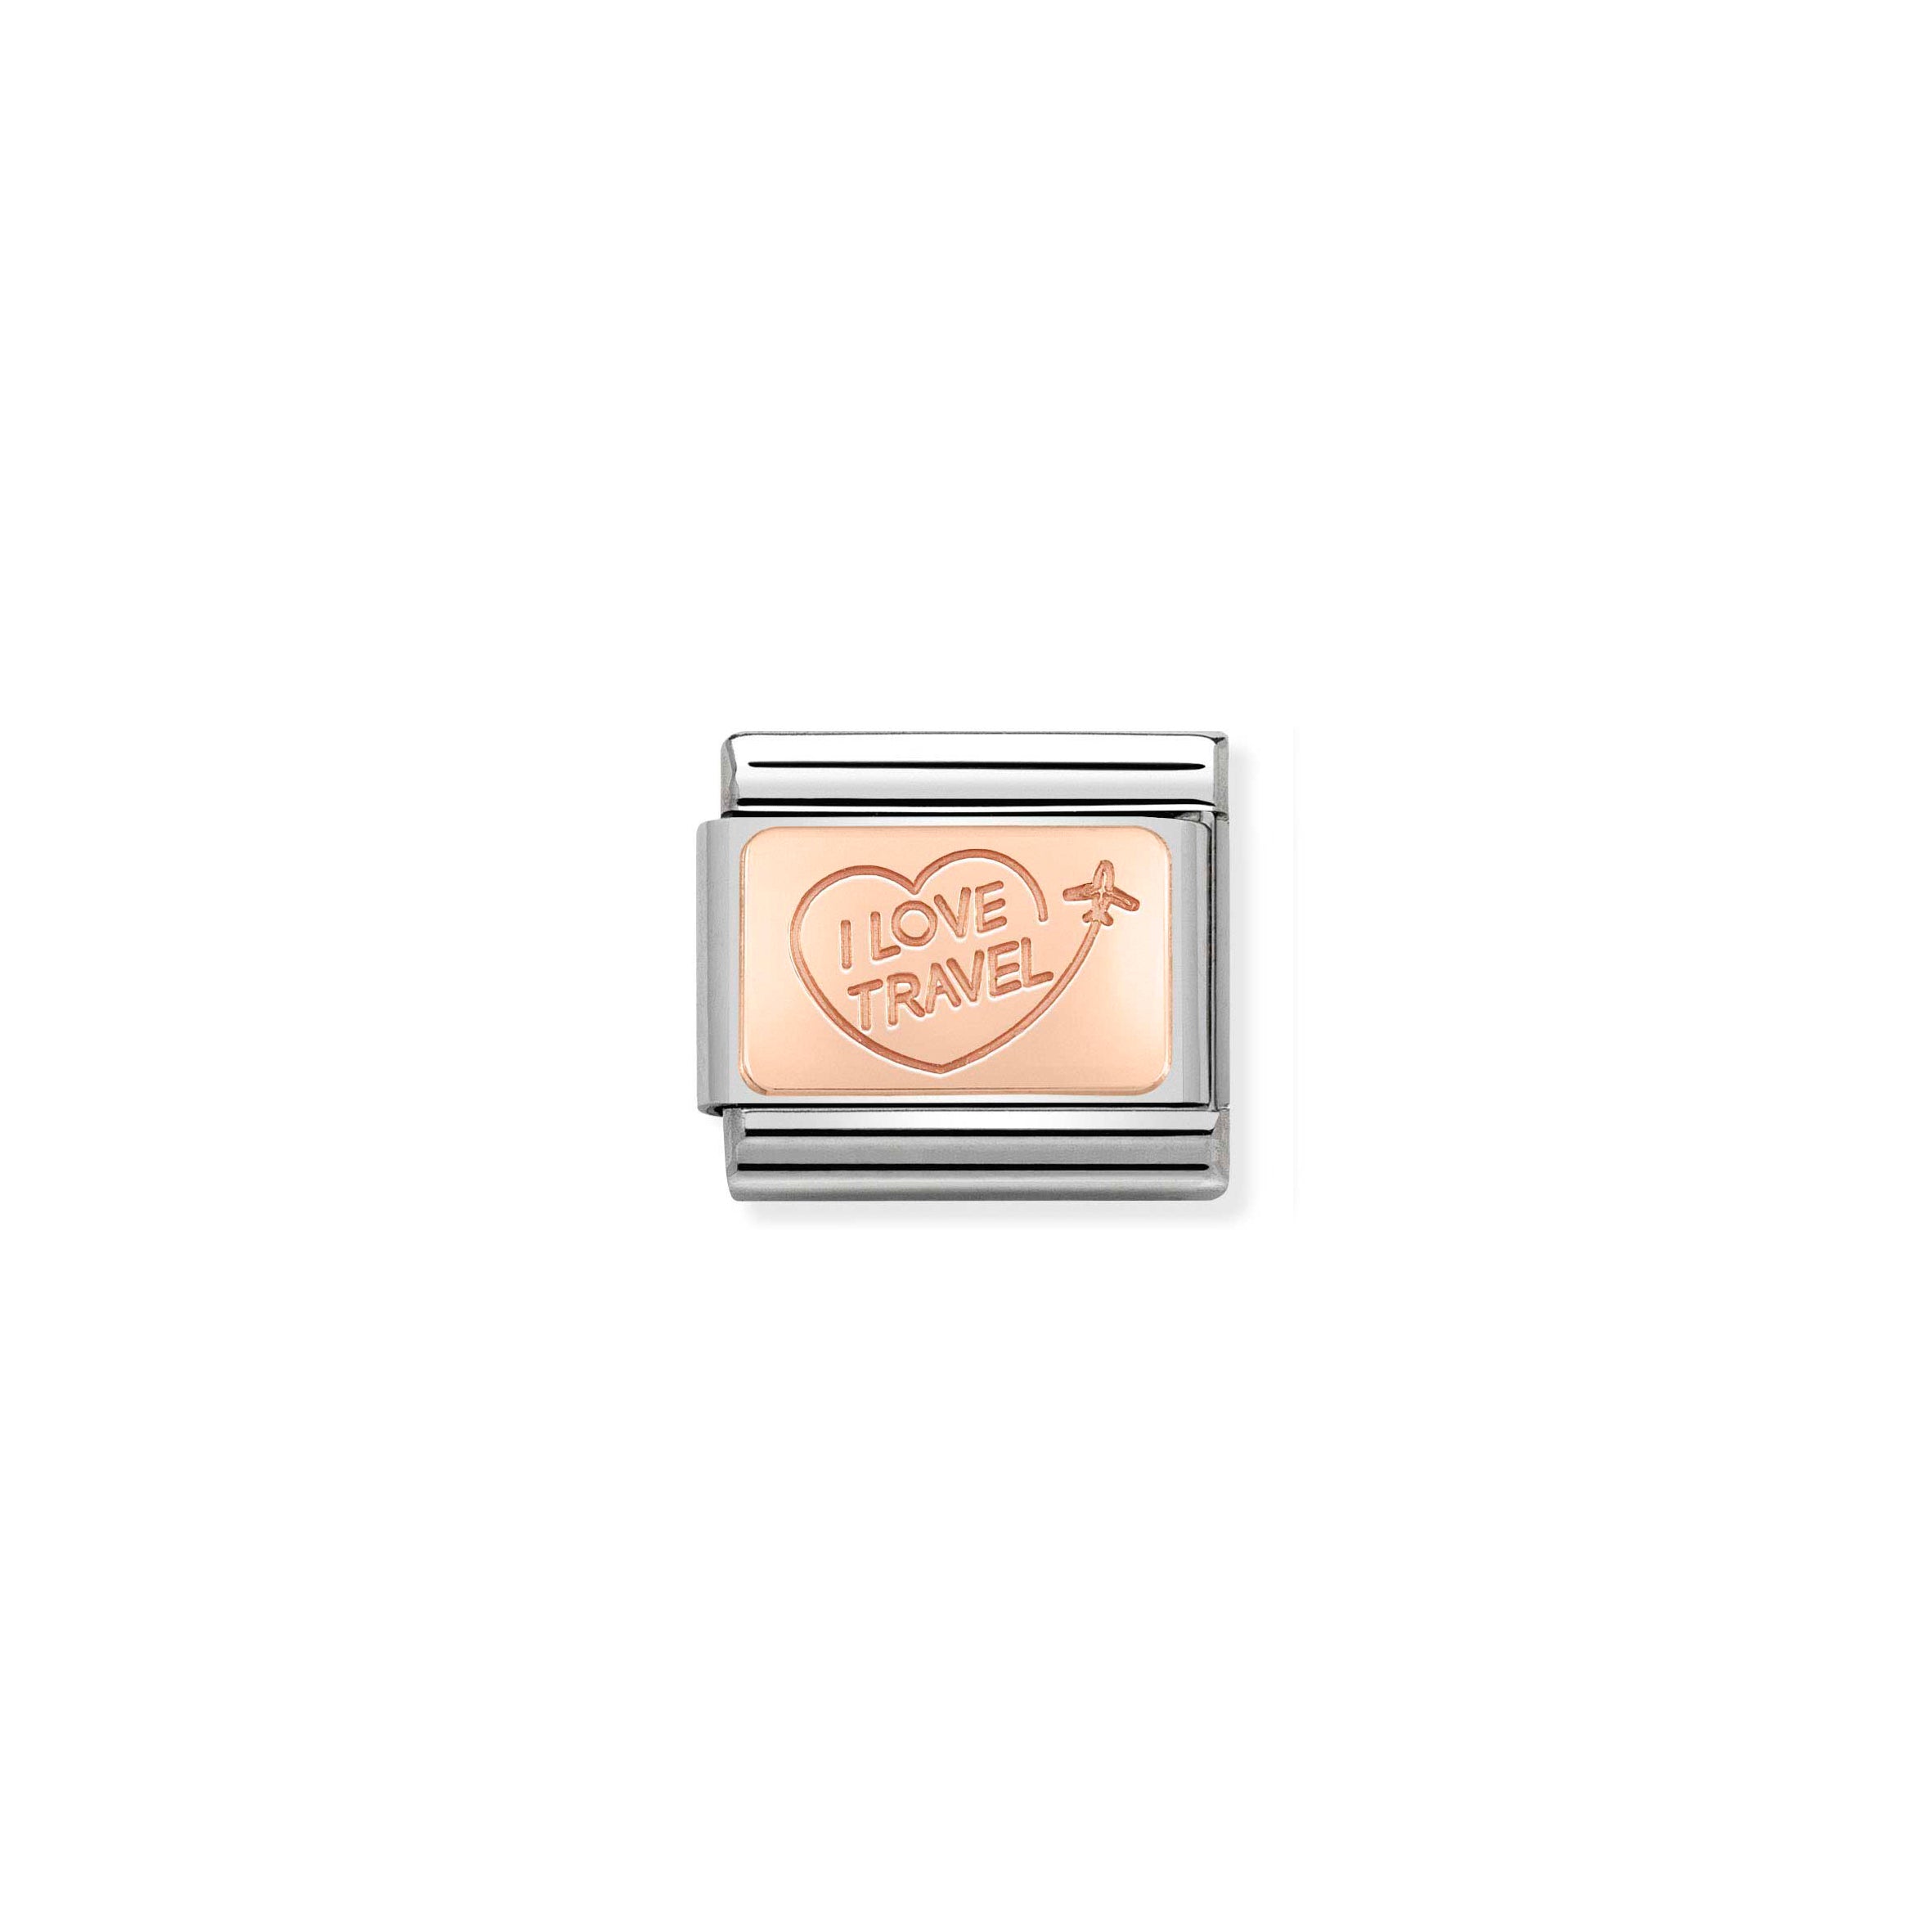 NOMINATION - Composable Classic SYMBOLS PLATE 1  st/steel & 9ct rose gold (I love travel)